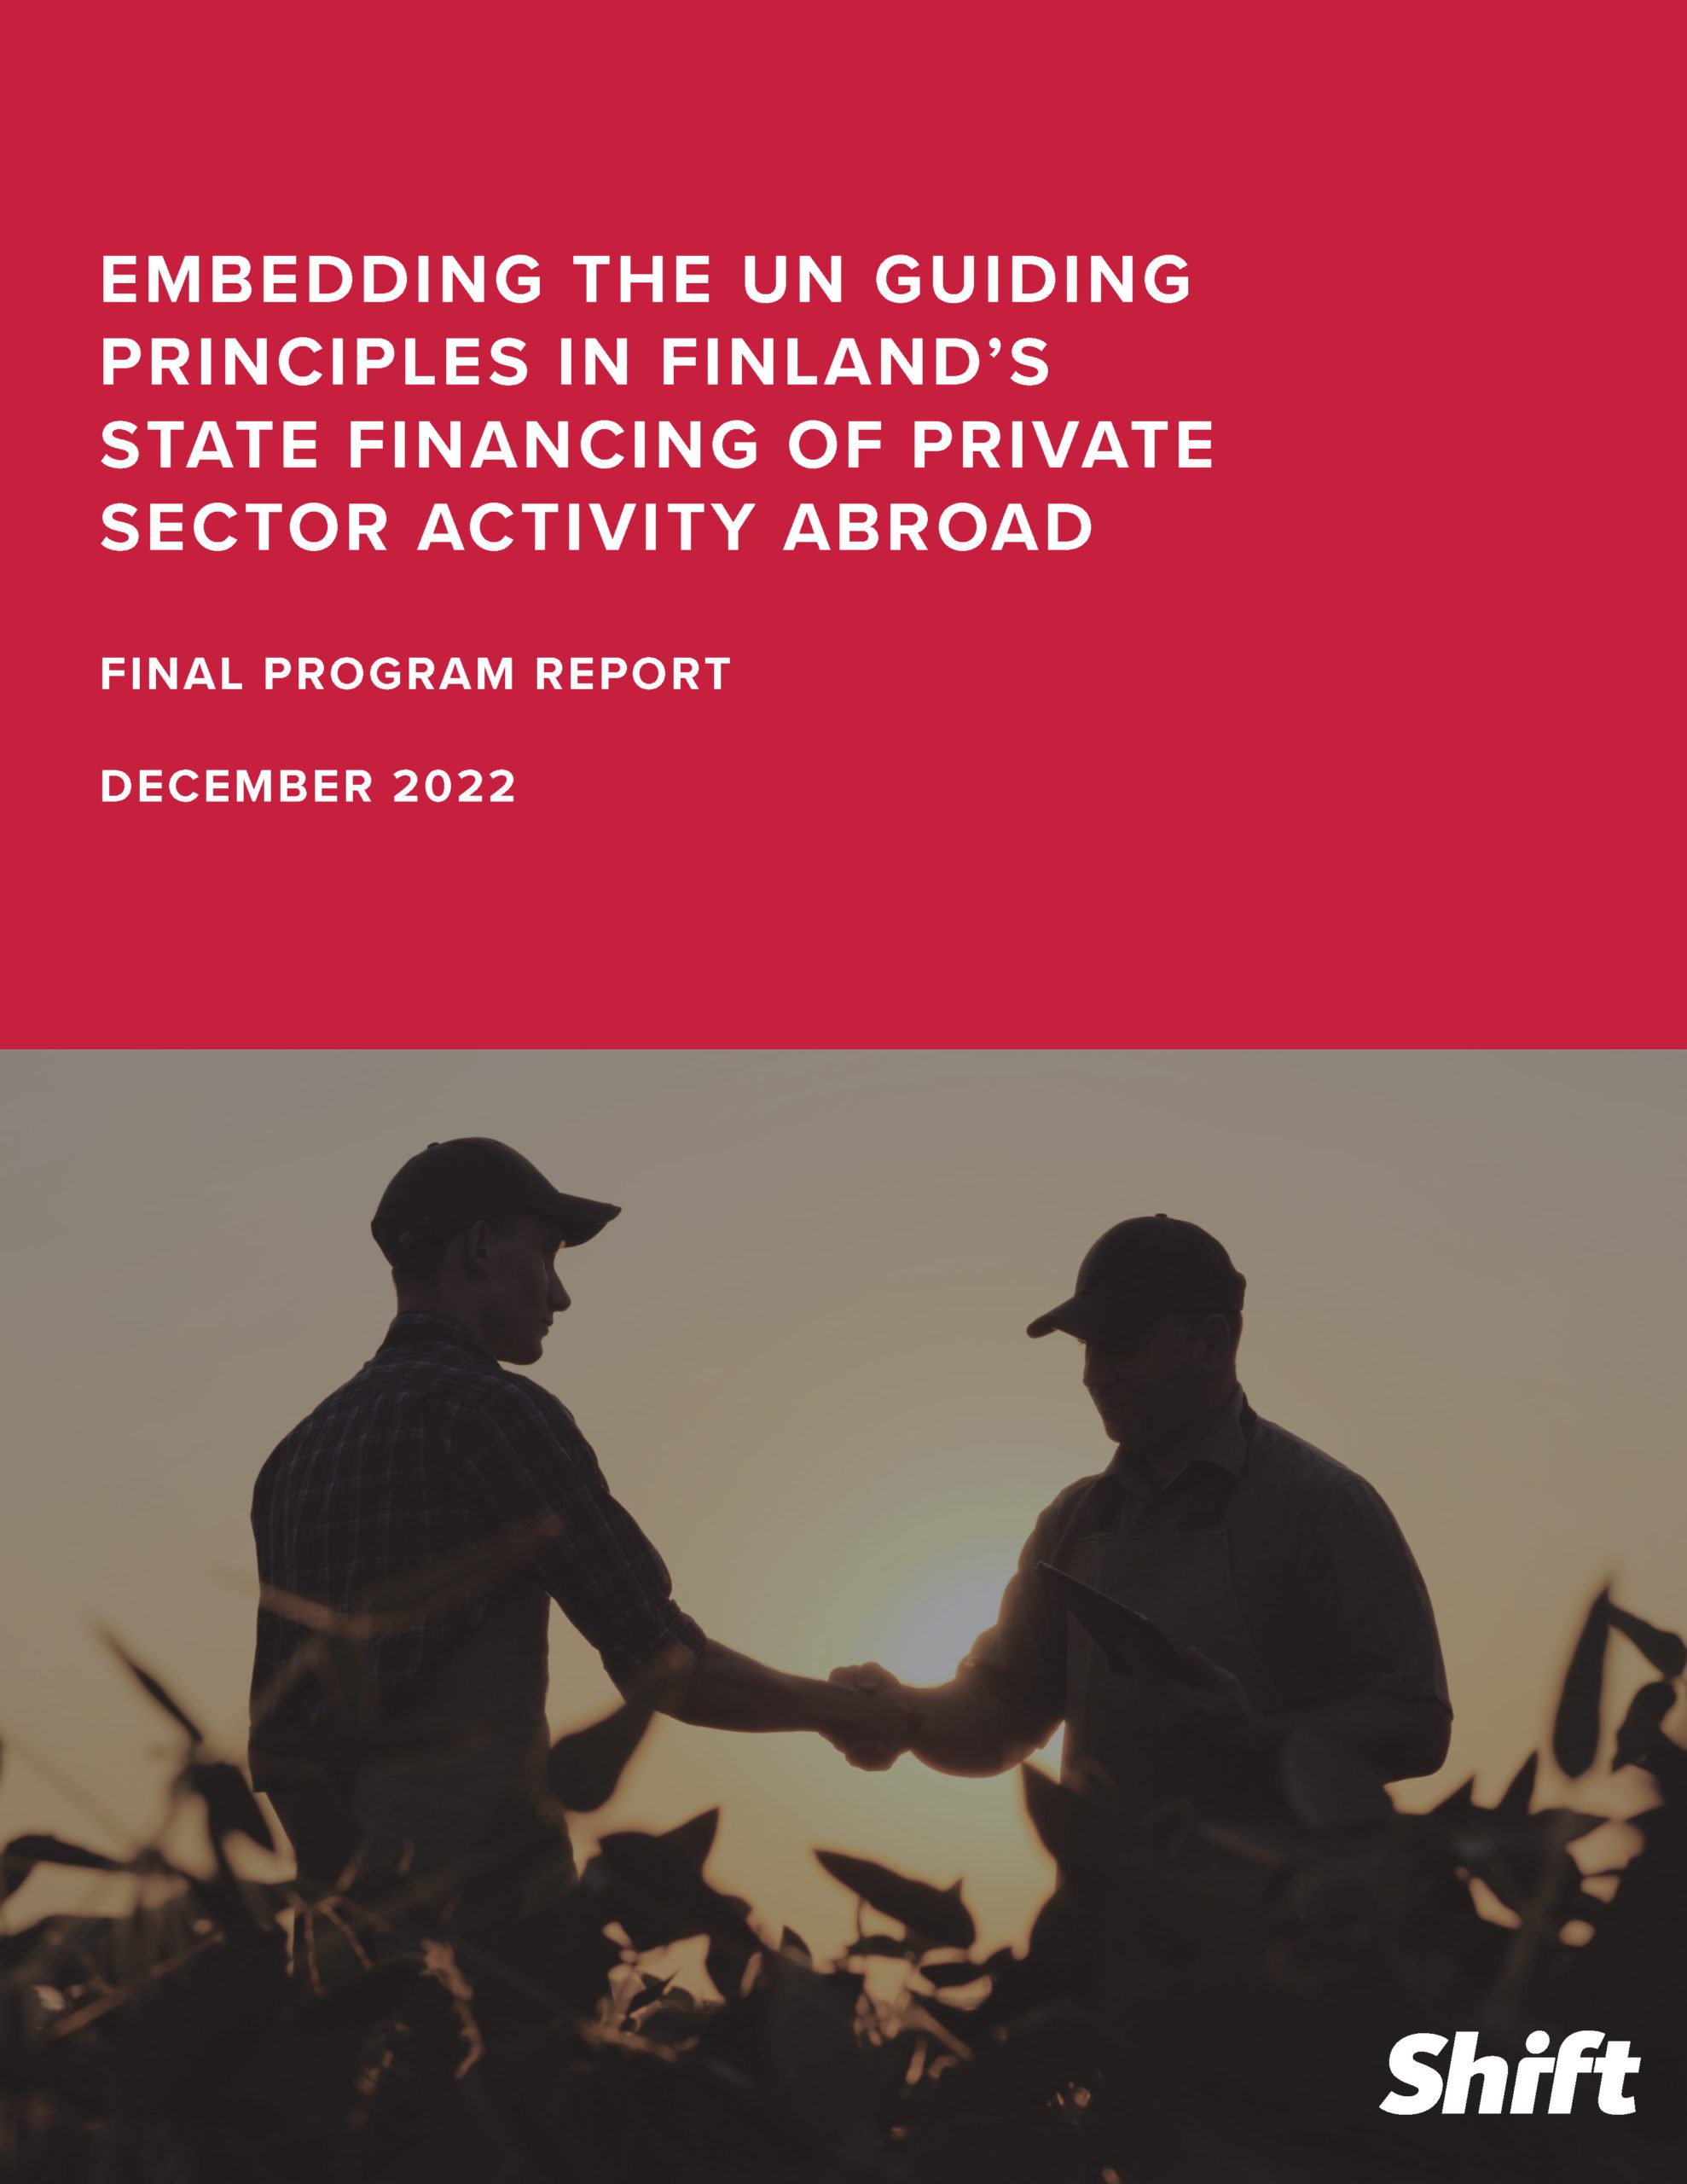 Embedding the UN Guiding Principles in Finland’s State Financing of Private Sector Activity Abroad